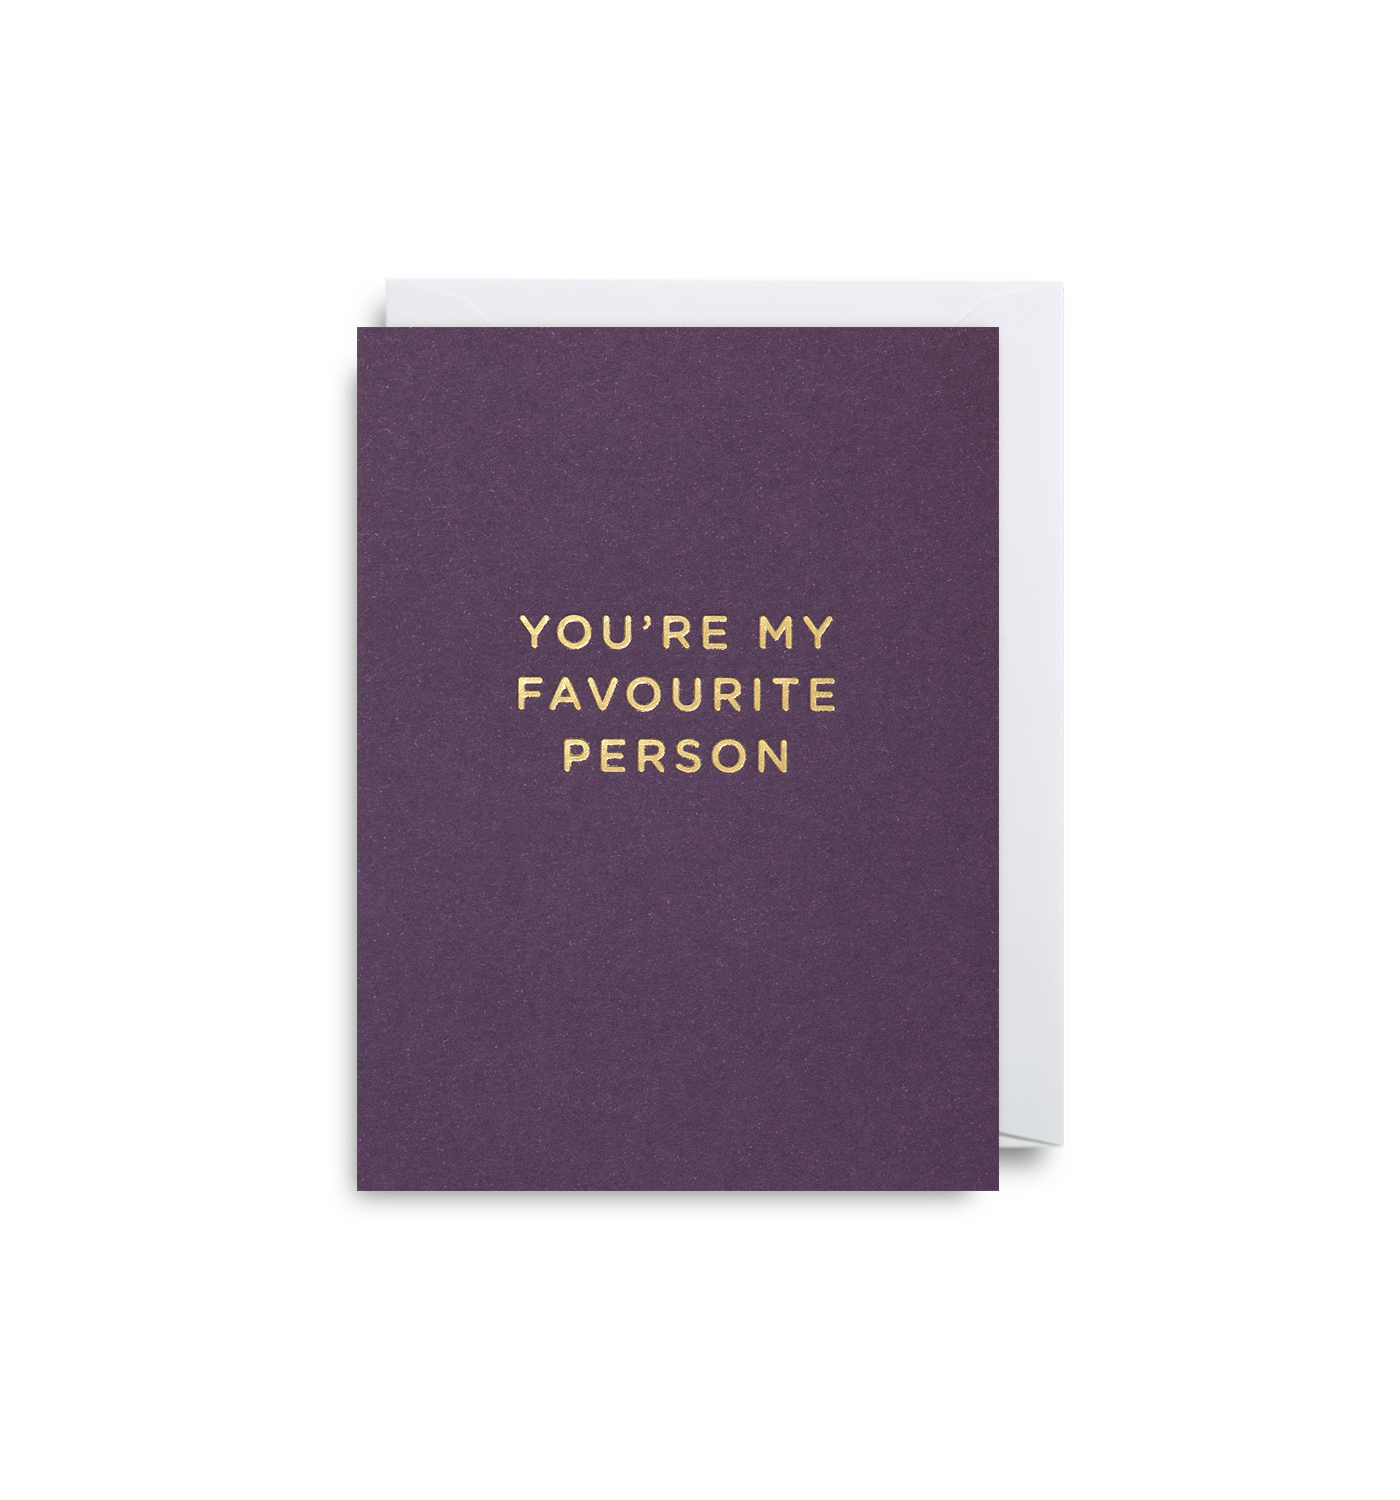 You're My Favourite Person - Mini Card - Five And Dime